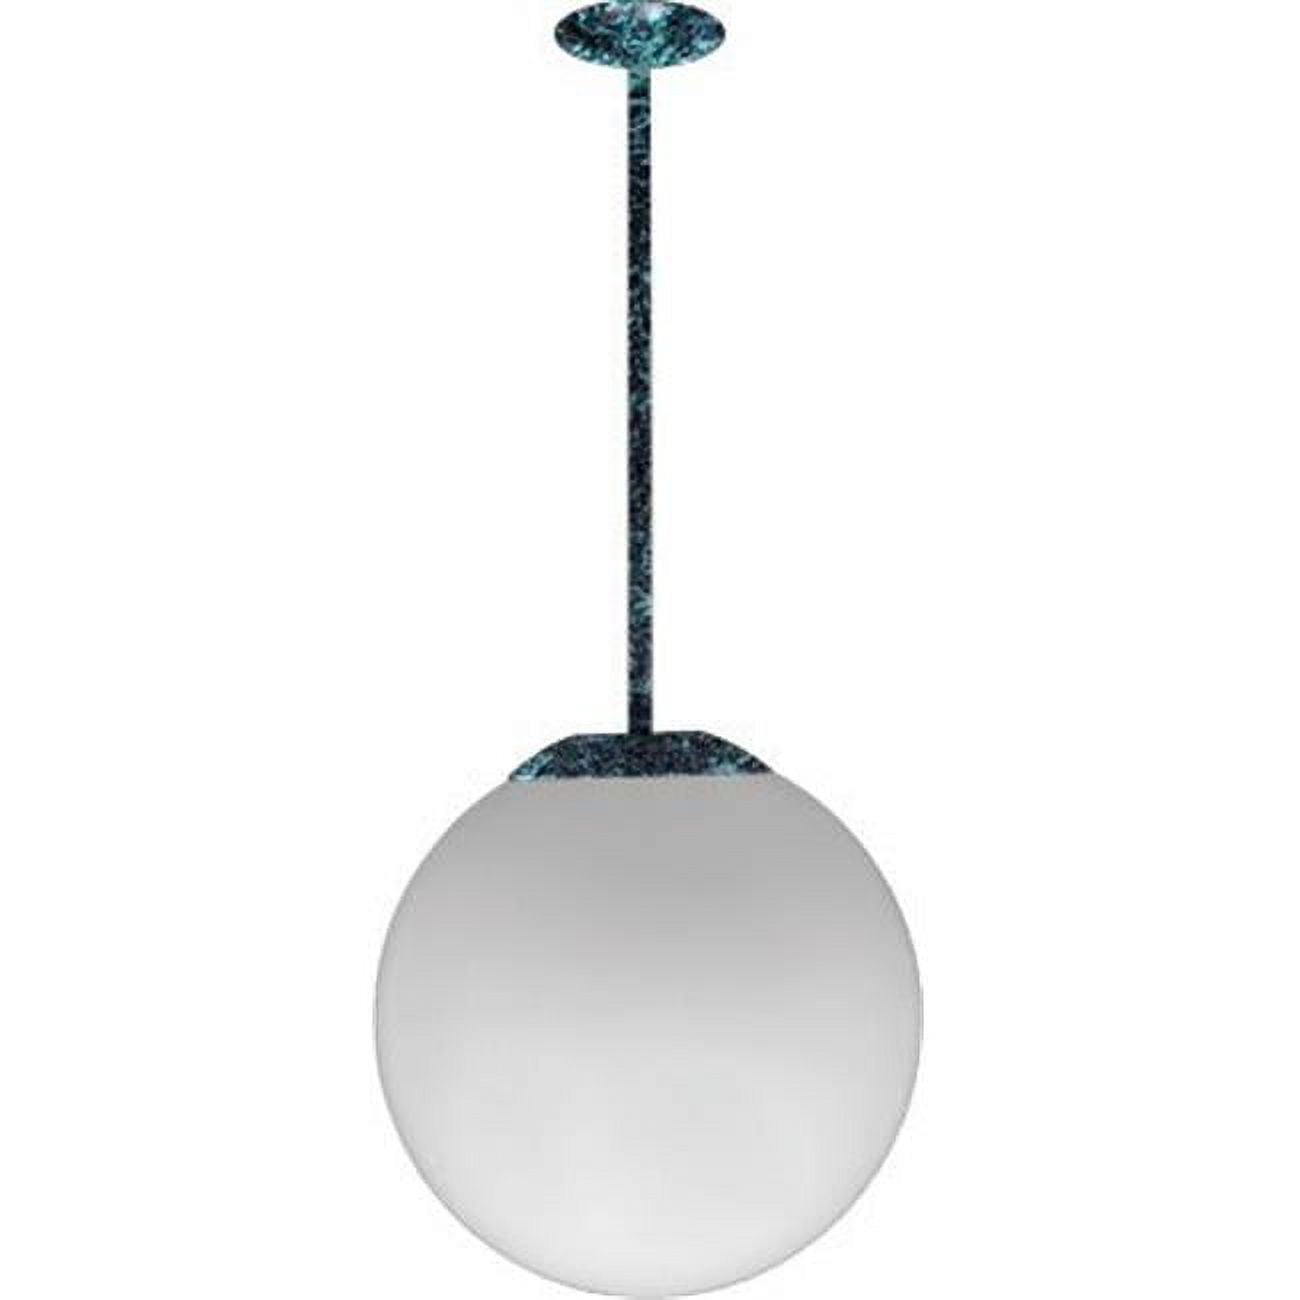 D7514-18-vg 18 In. 120 V 50 Watts Ceiling Globe Fixture 18 In. Drop With High Pressure Sodium Lamp, Verde Green